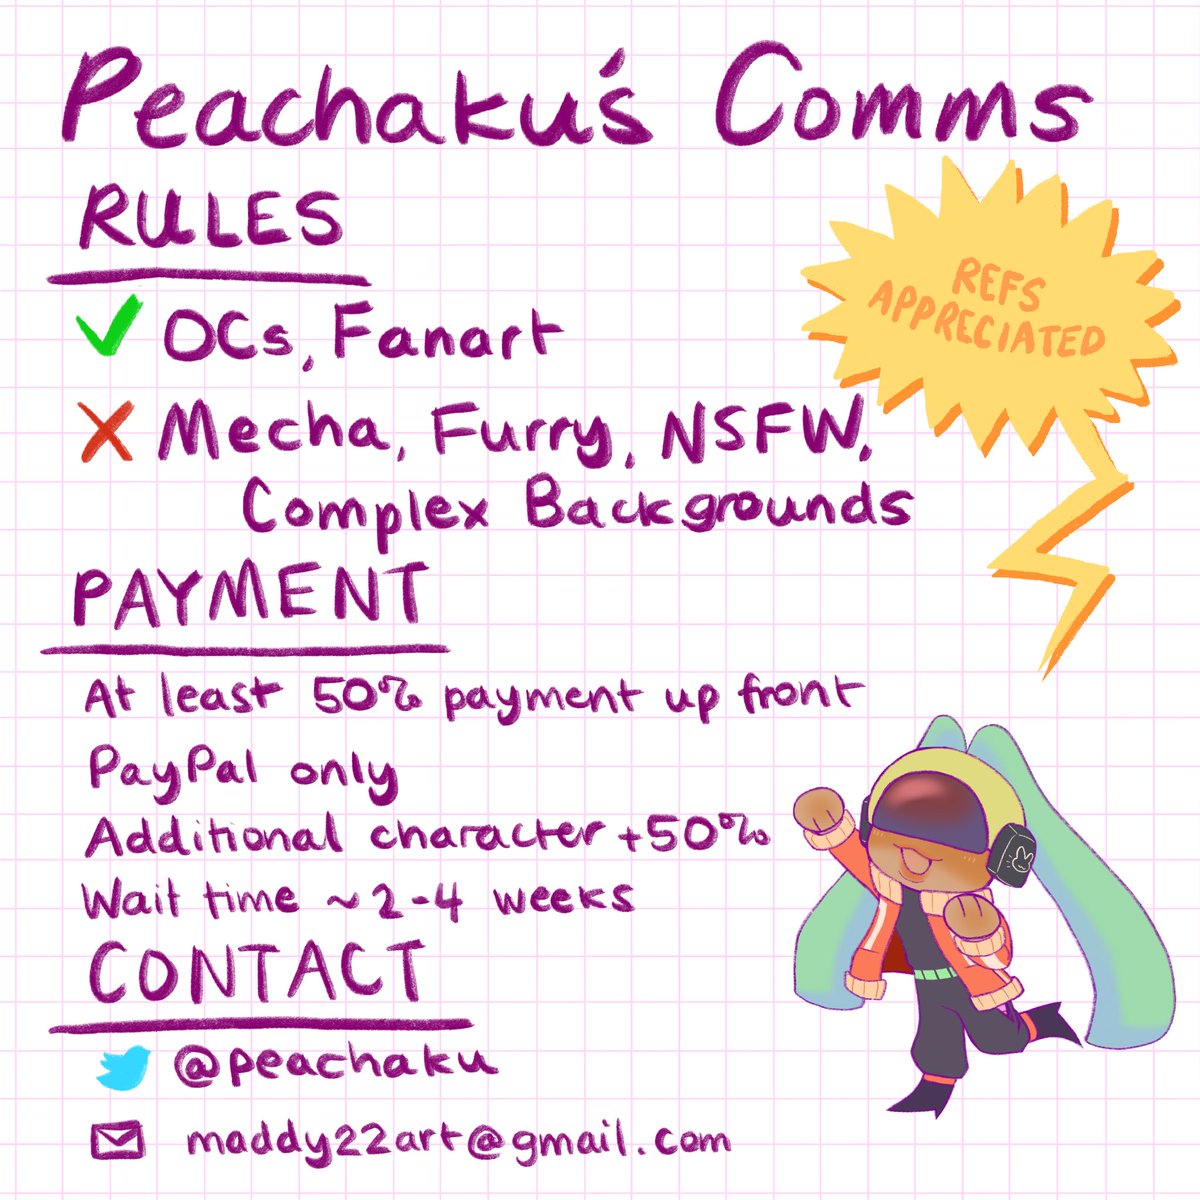 [rts appreciated] hii i'm opening commissions 🎉 

please see my comm carrd for full terms of service and payment info:
https://t.co/EGQxQ4Bijh

I'll be starting with 3 slots. DM if interested! 